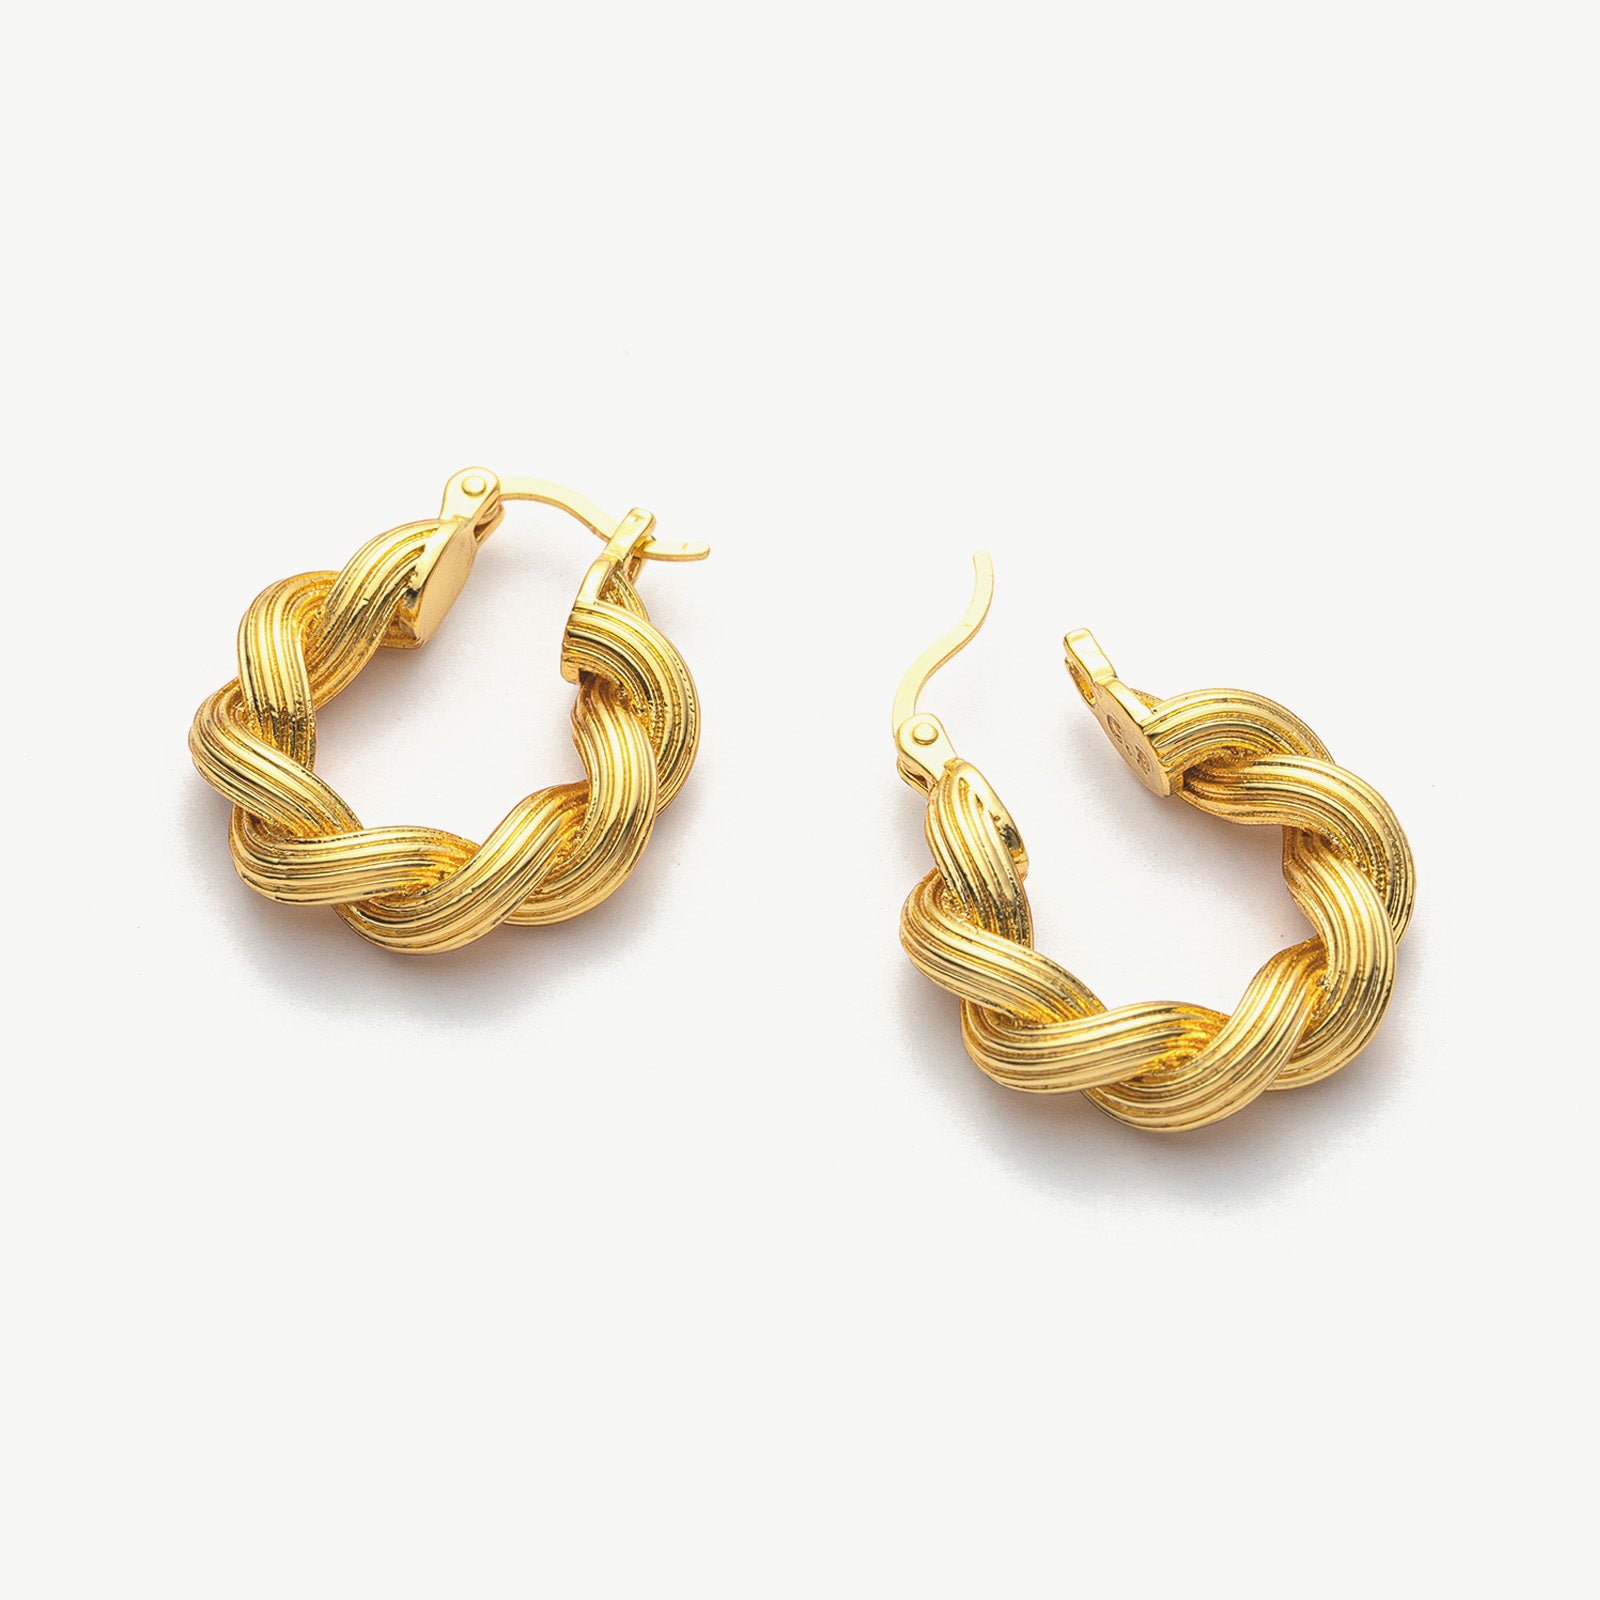 Double Rope Hoop Earrings, featuring sophisticated loops of rope, these hoops provide a refined and timeless addition to your ear jewelry collection